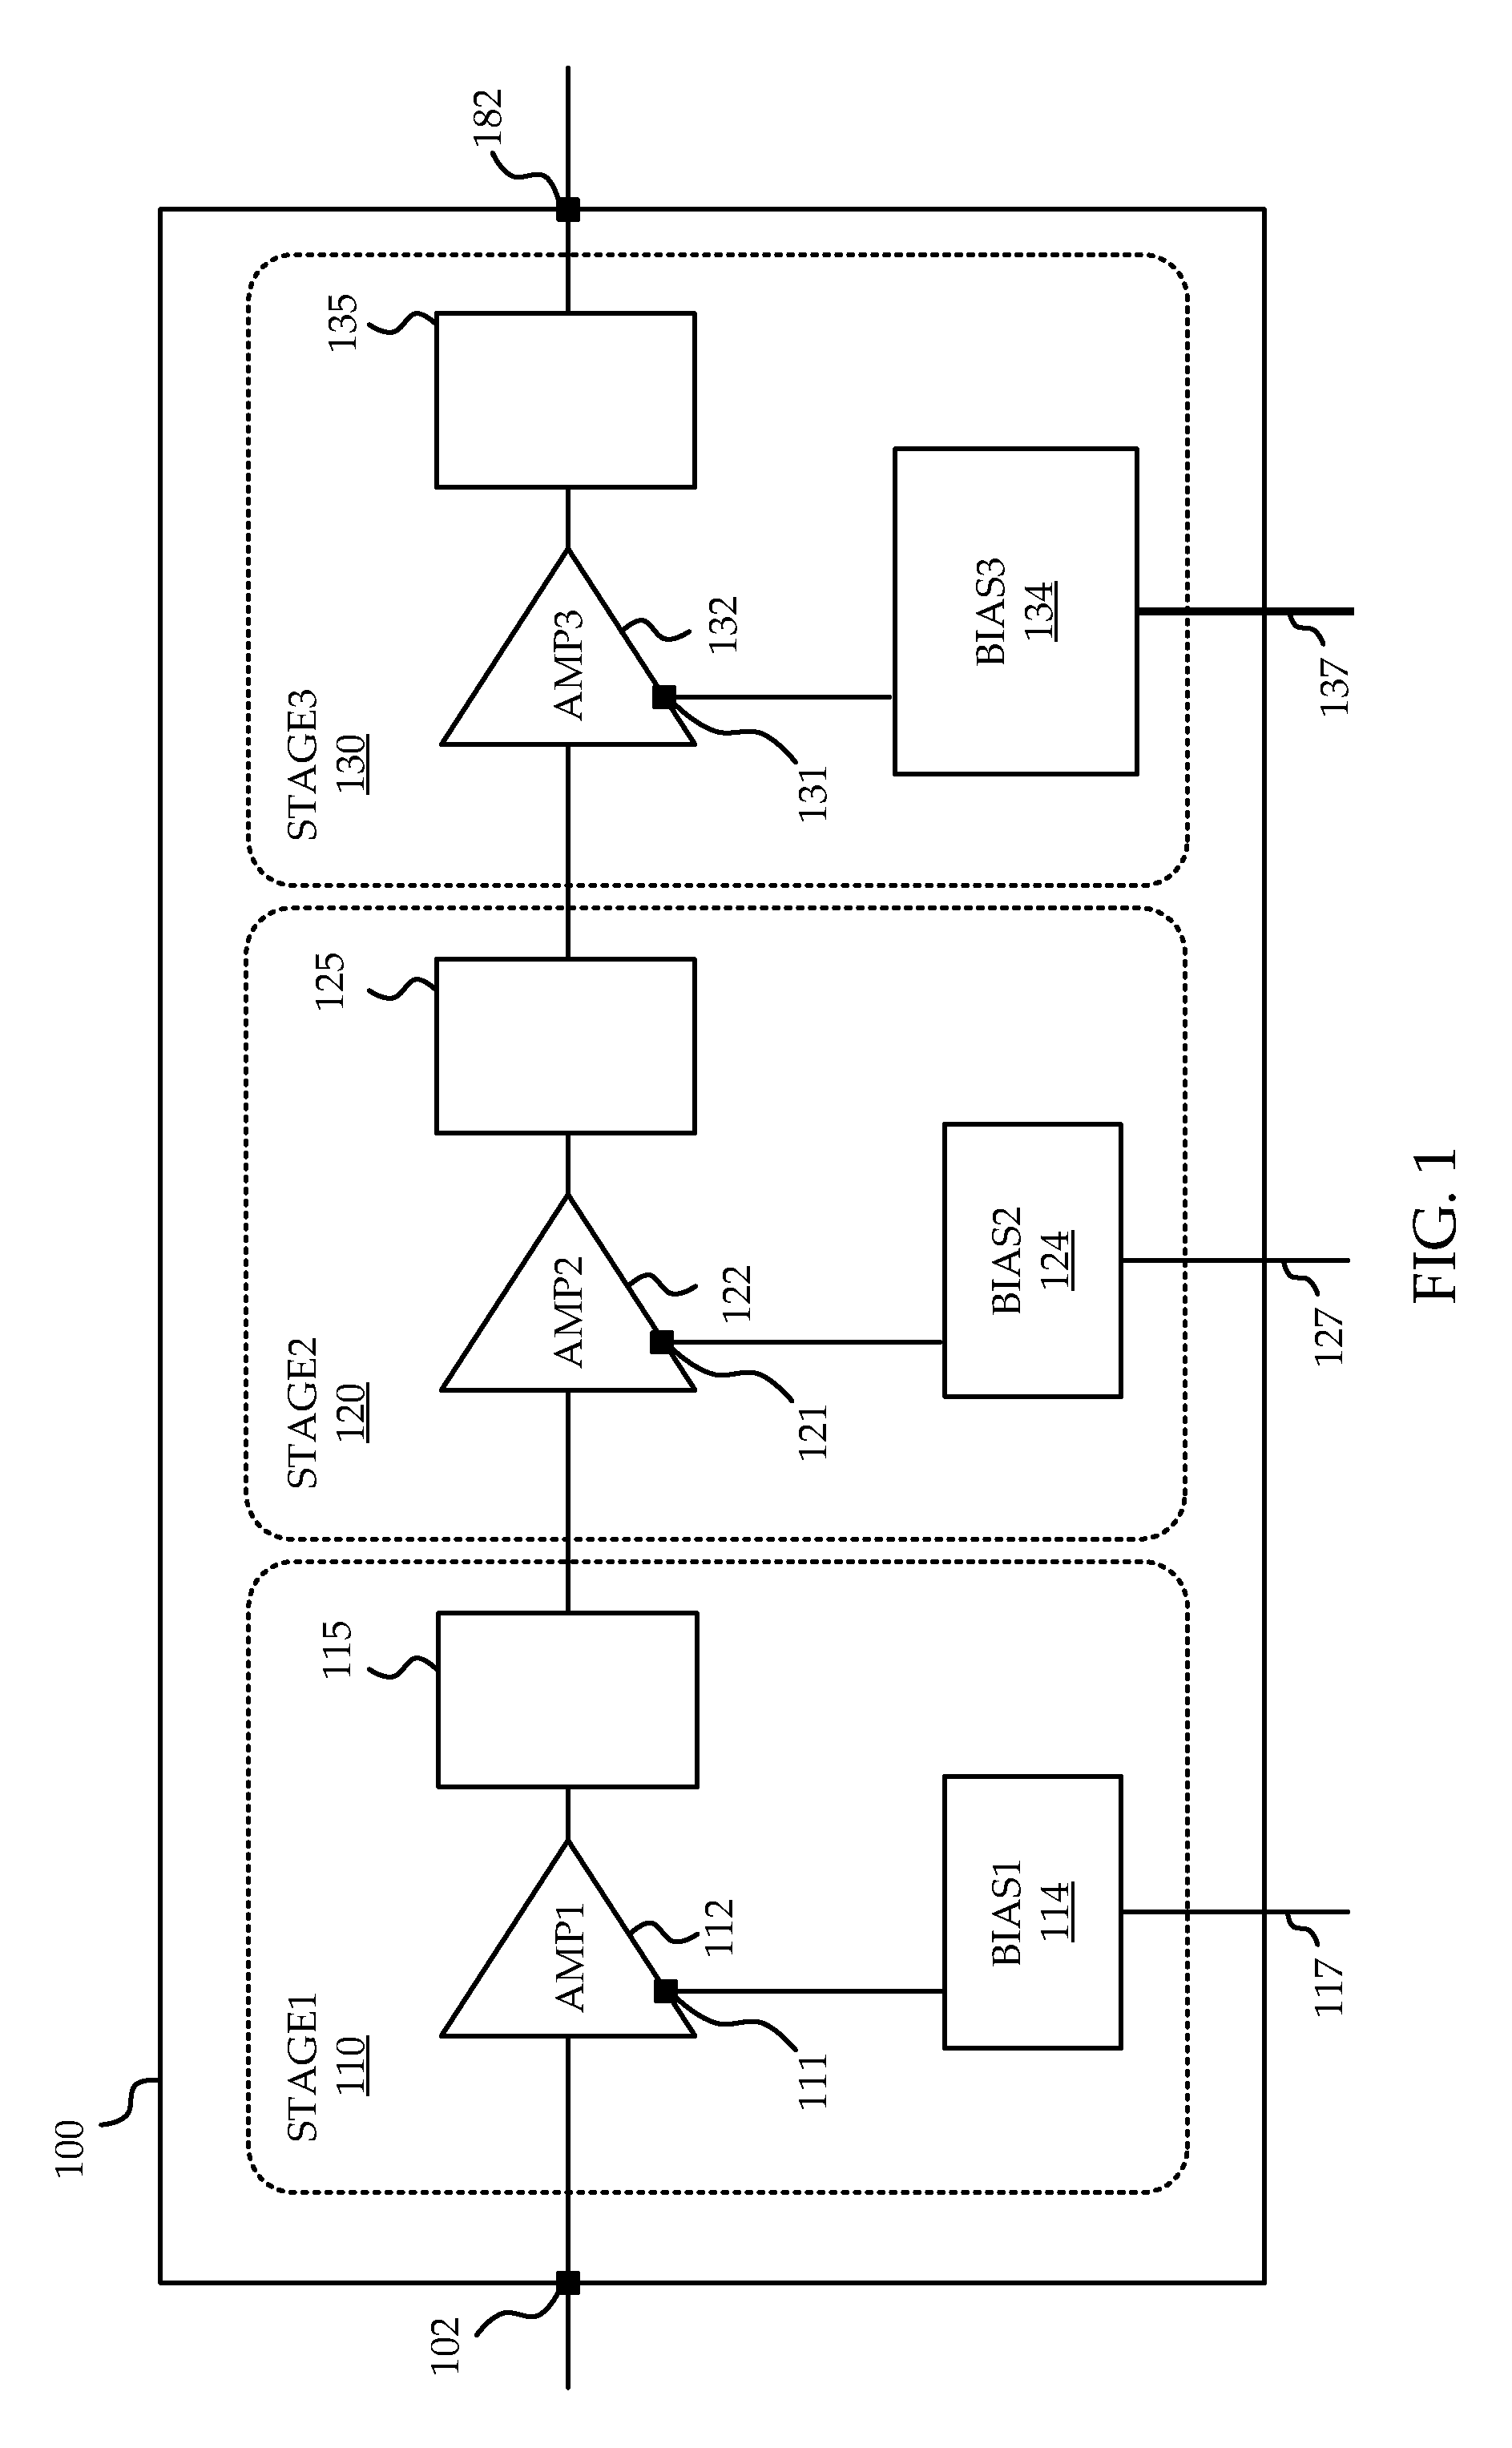 System and method of prebias for rapid power amplifier response correction